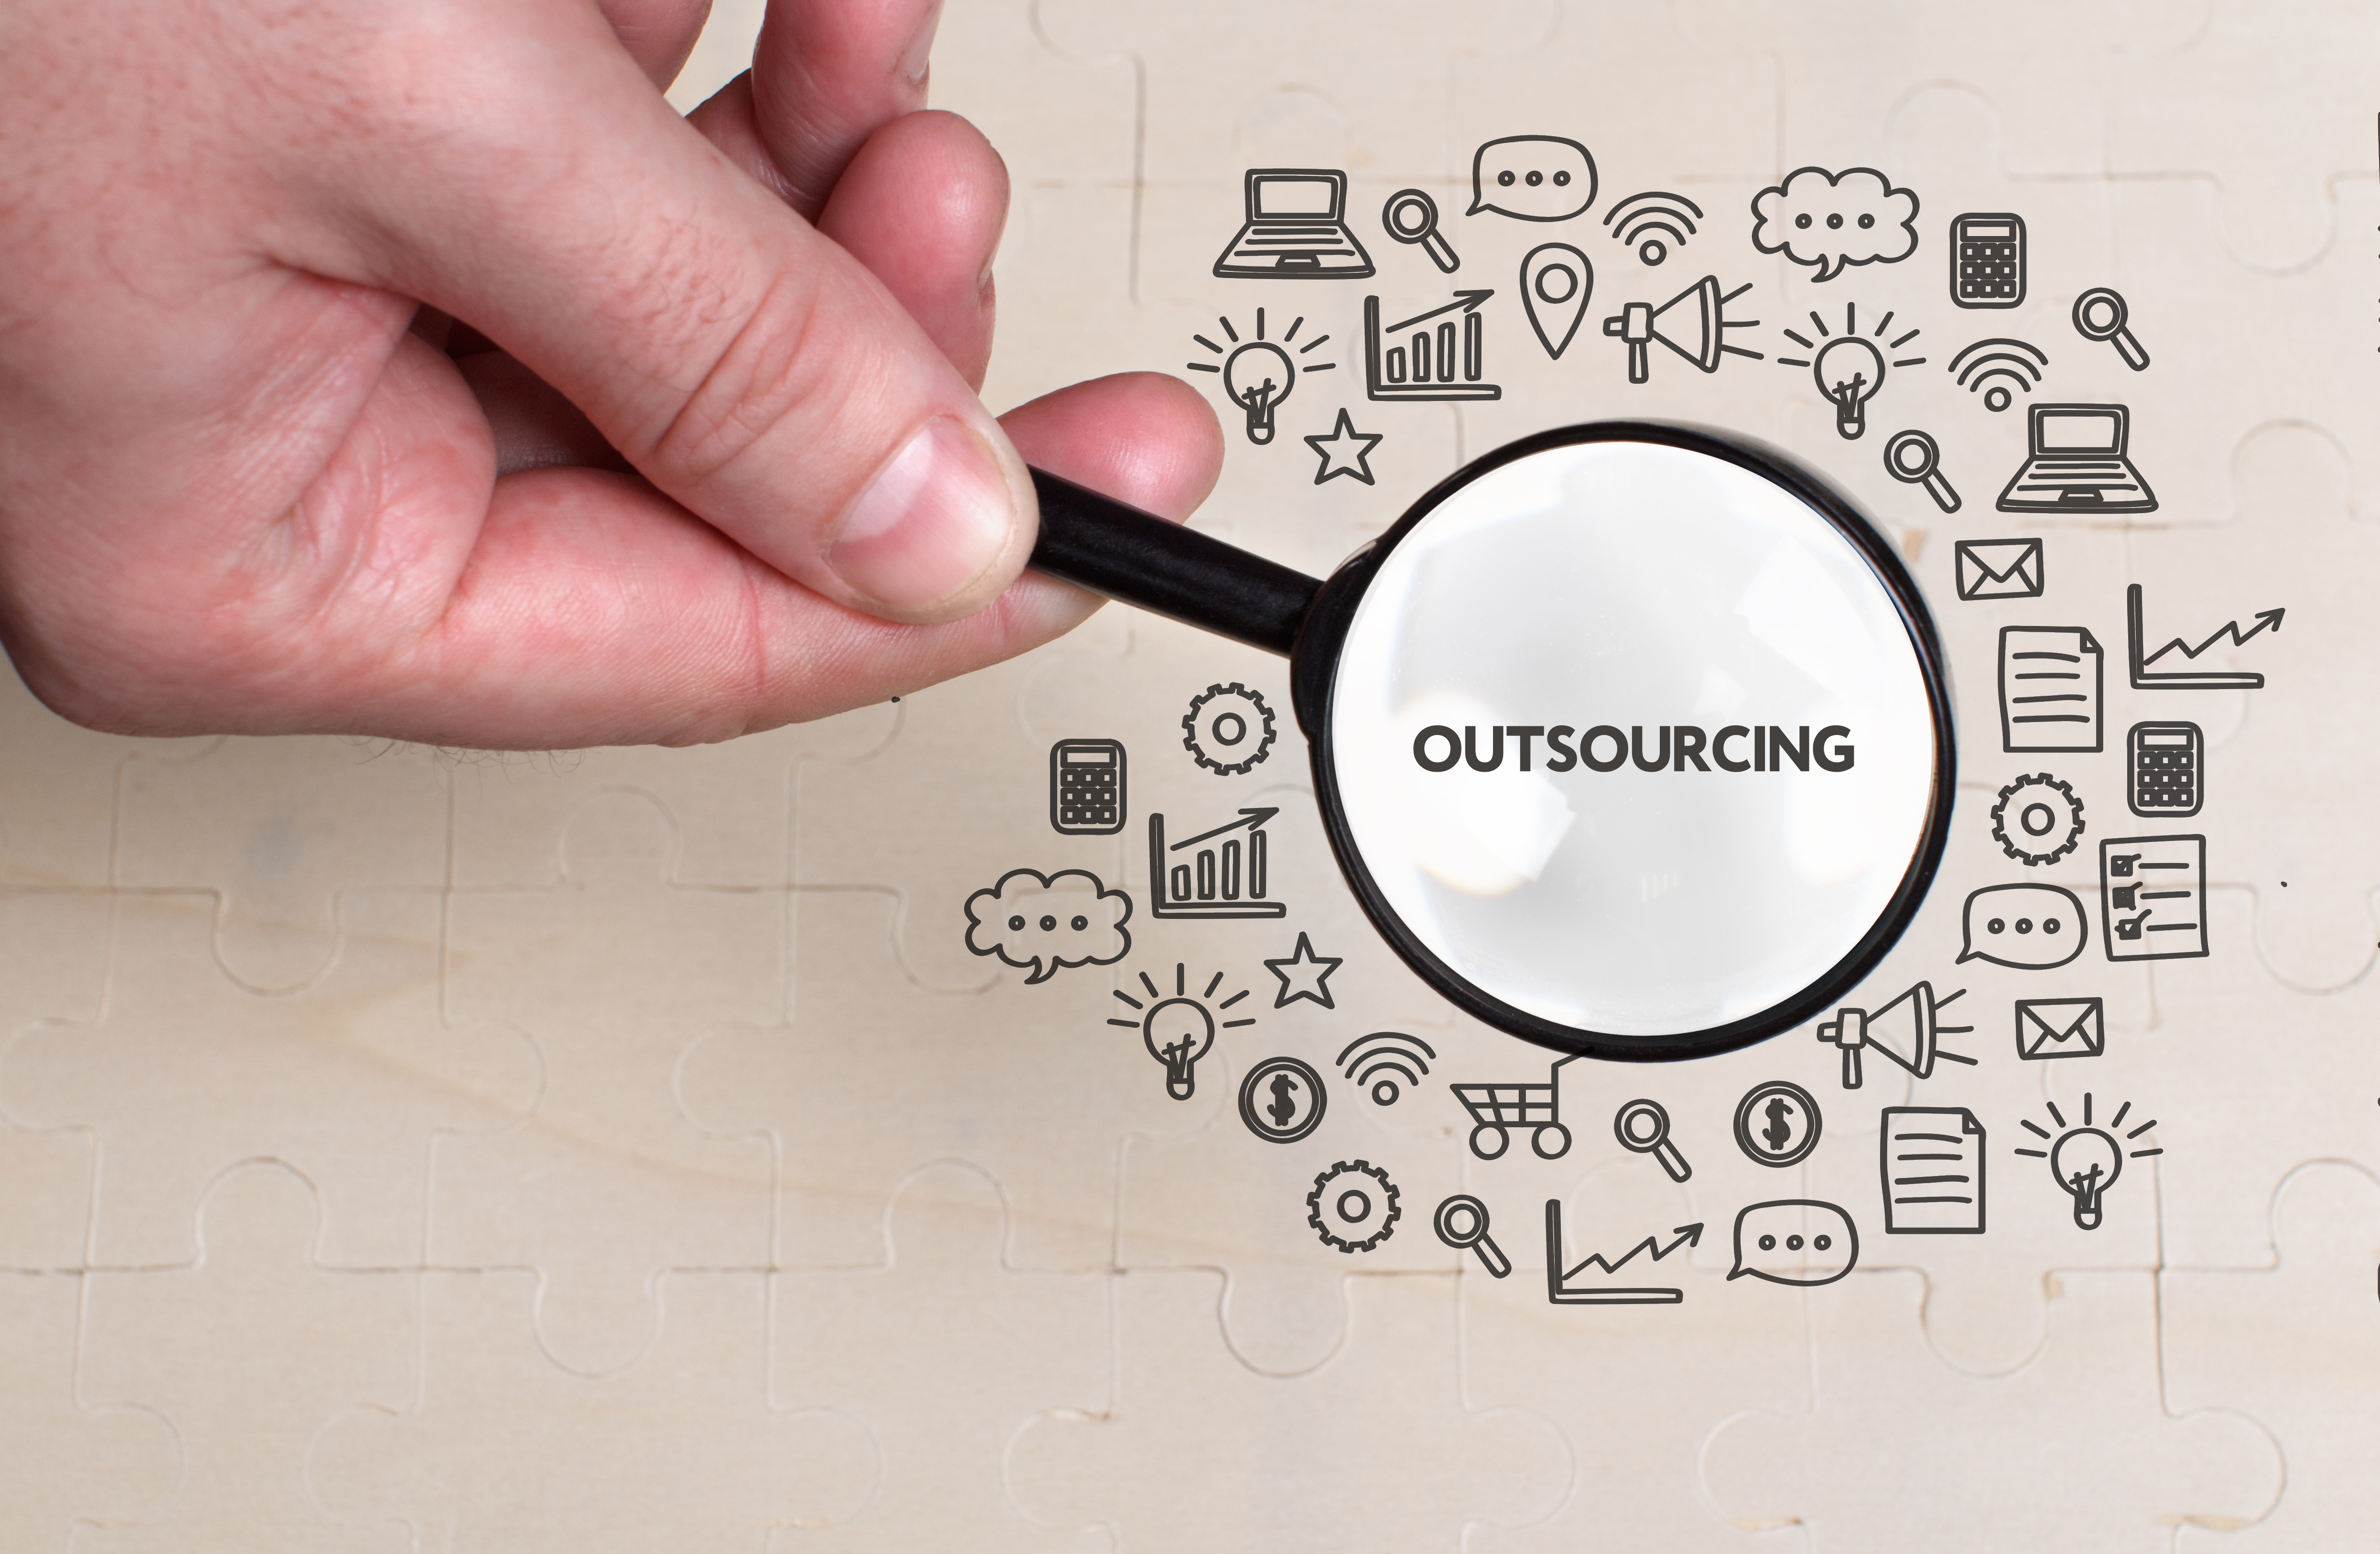 Why outsource IT Support?